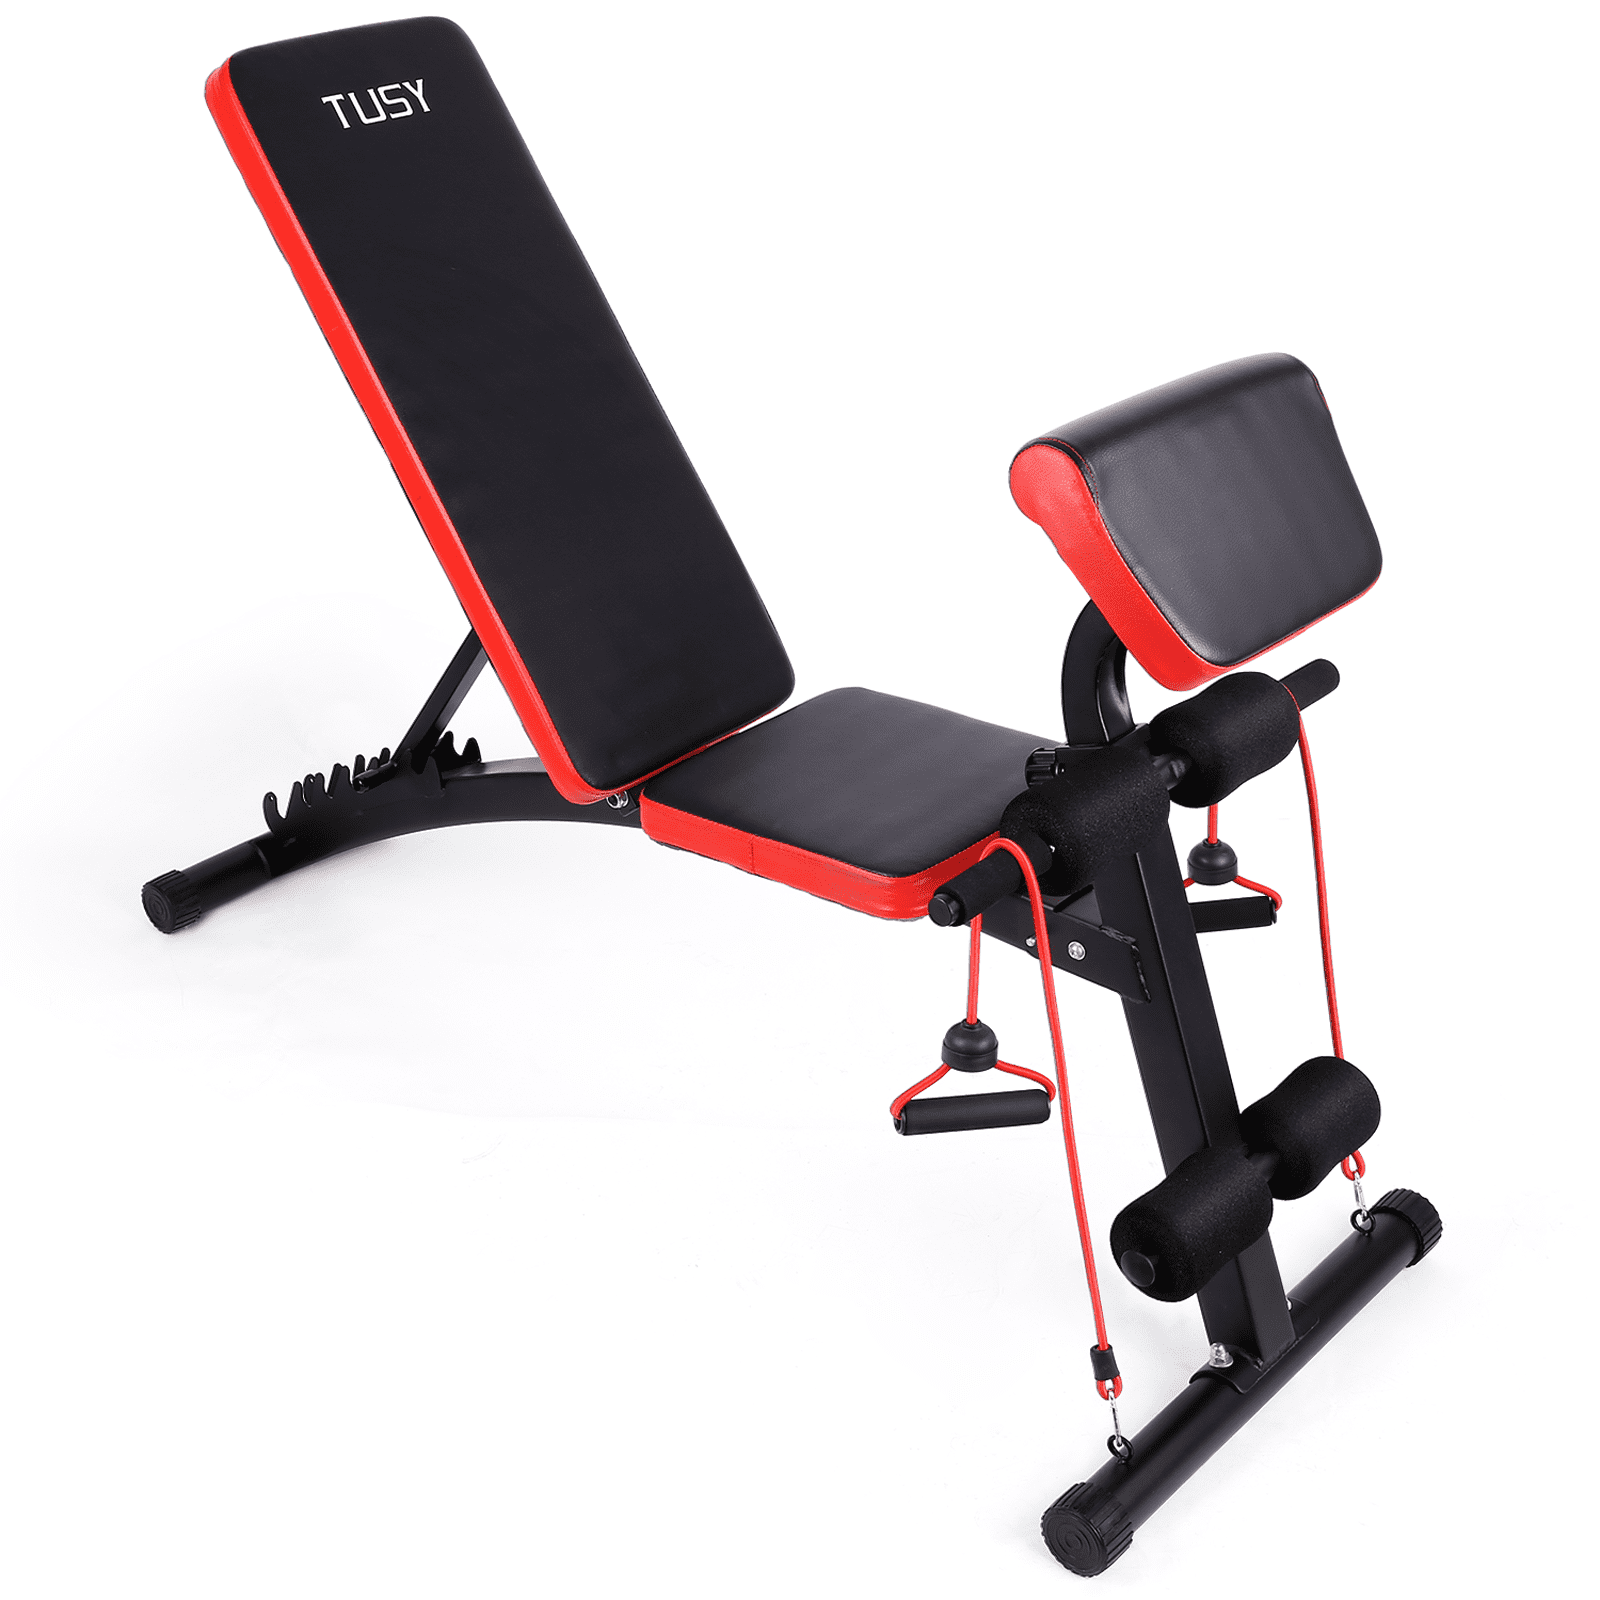 Adjustable Multifunctional Weight Bench for Full Body Workout w/ Resistant Rope 